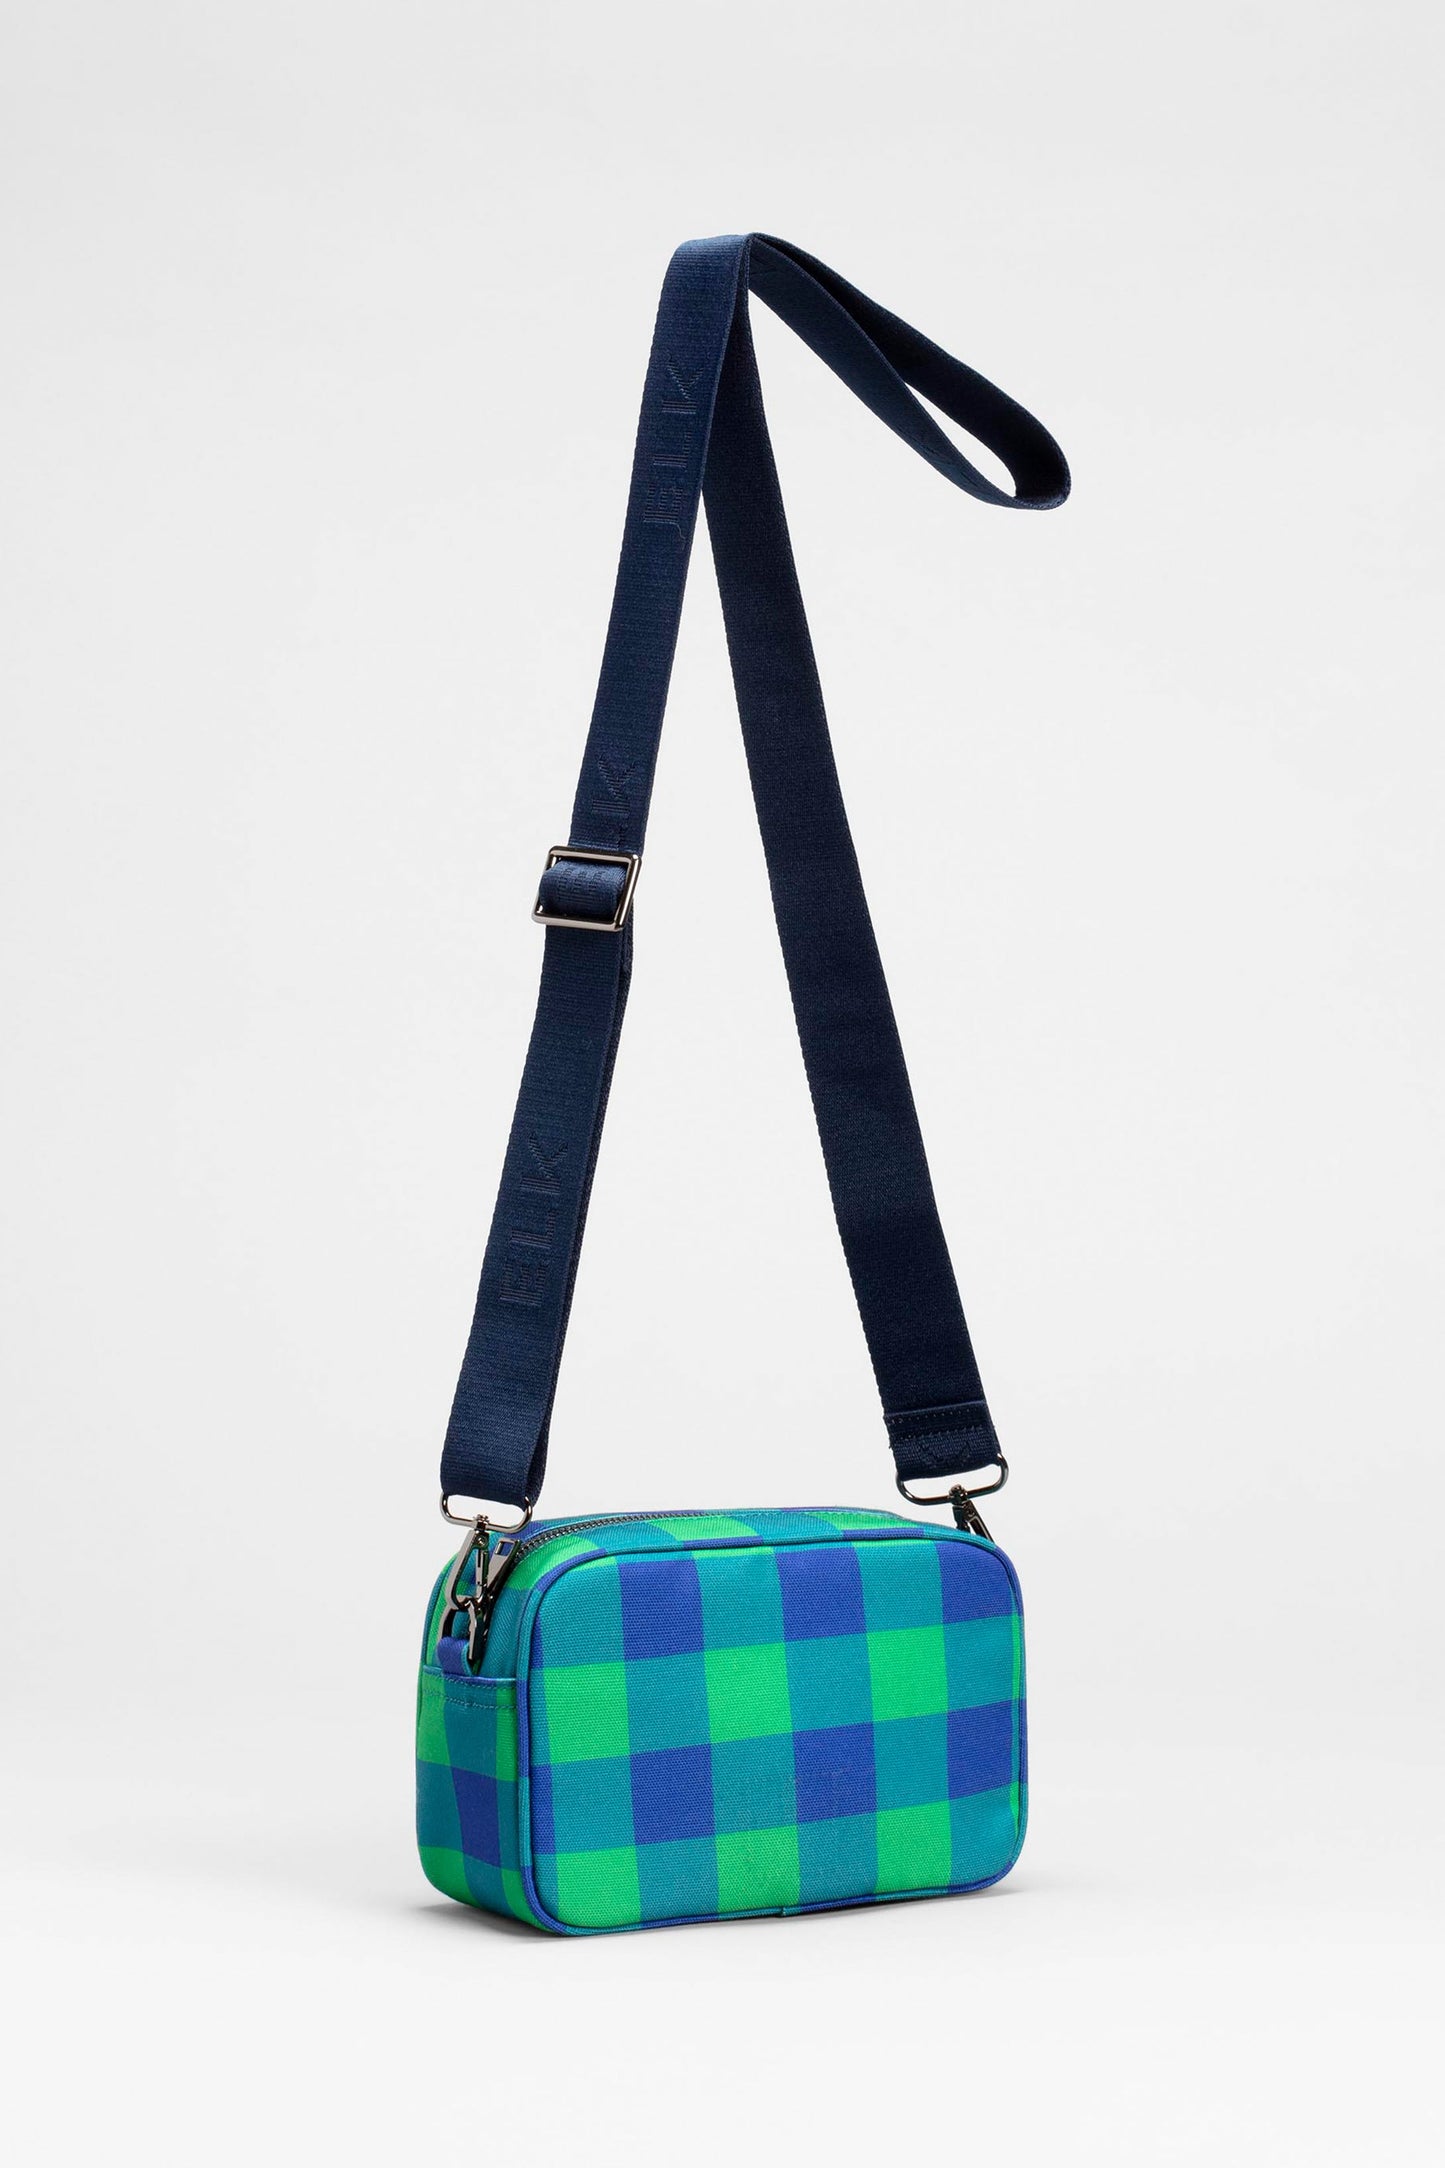 Kassel Recycled Fabric Gingham Print Zip Up Cross Body Bag Front | ELECTRIC BLUE GREEN GINGHAM